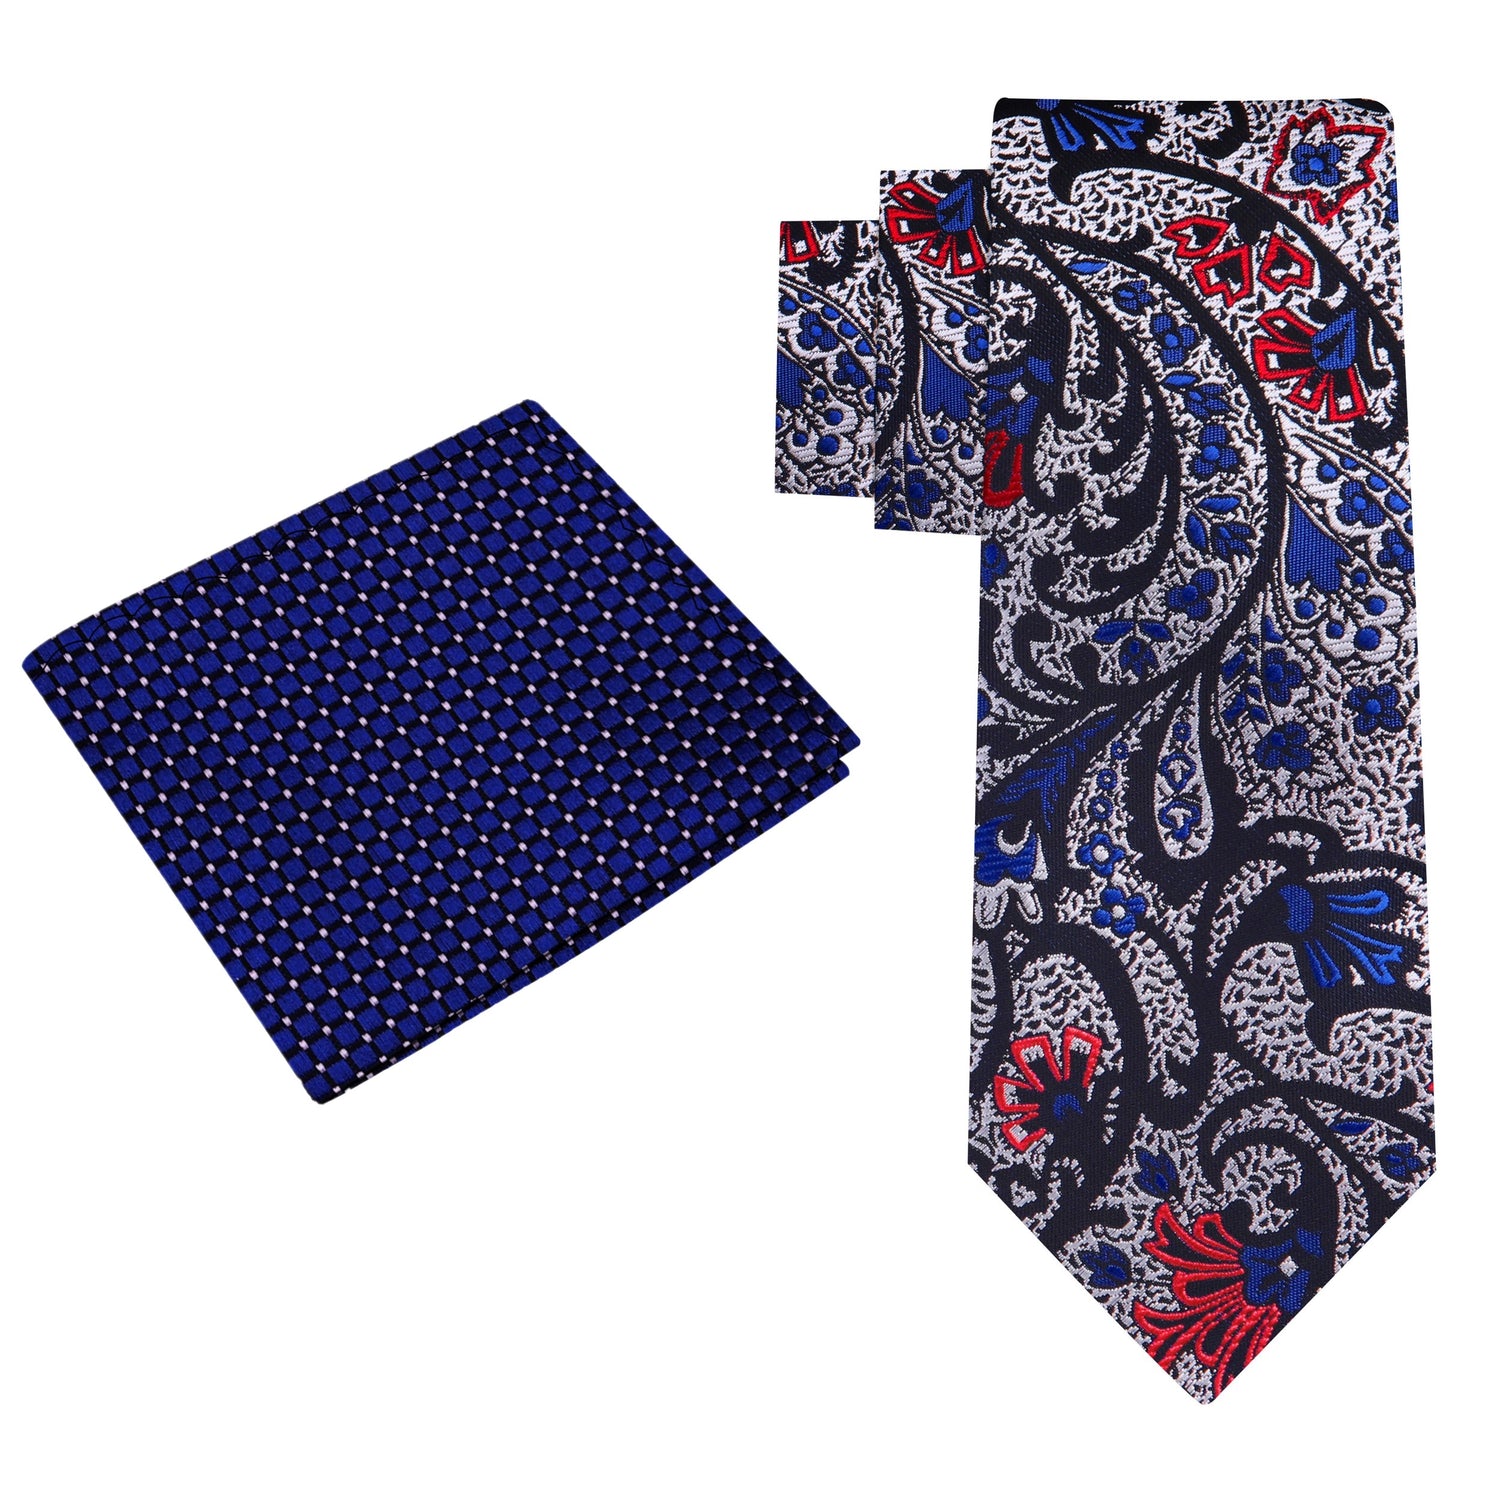 Alt View: Silver Red Blue Paisley Tie and Blue Square